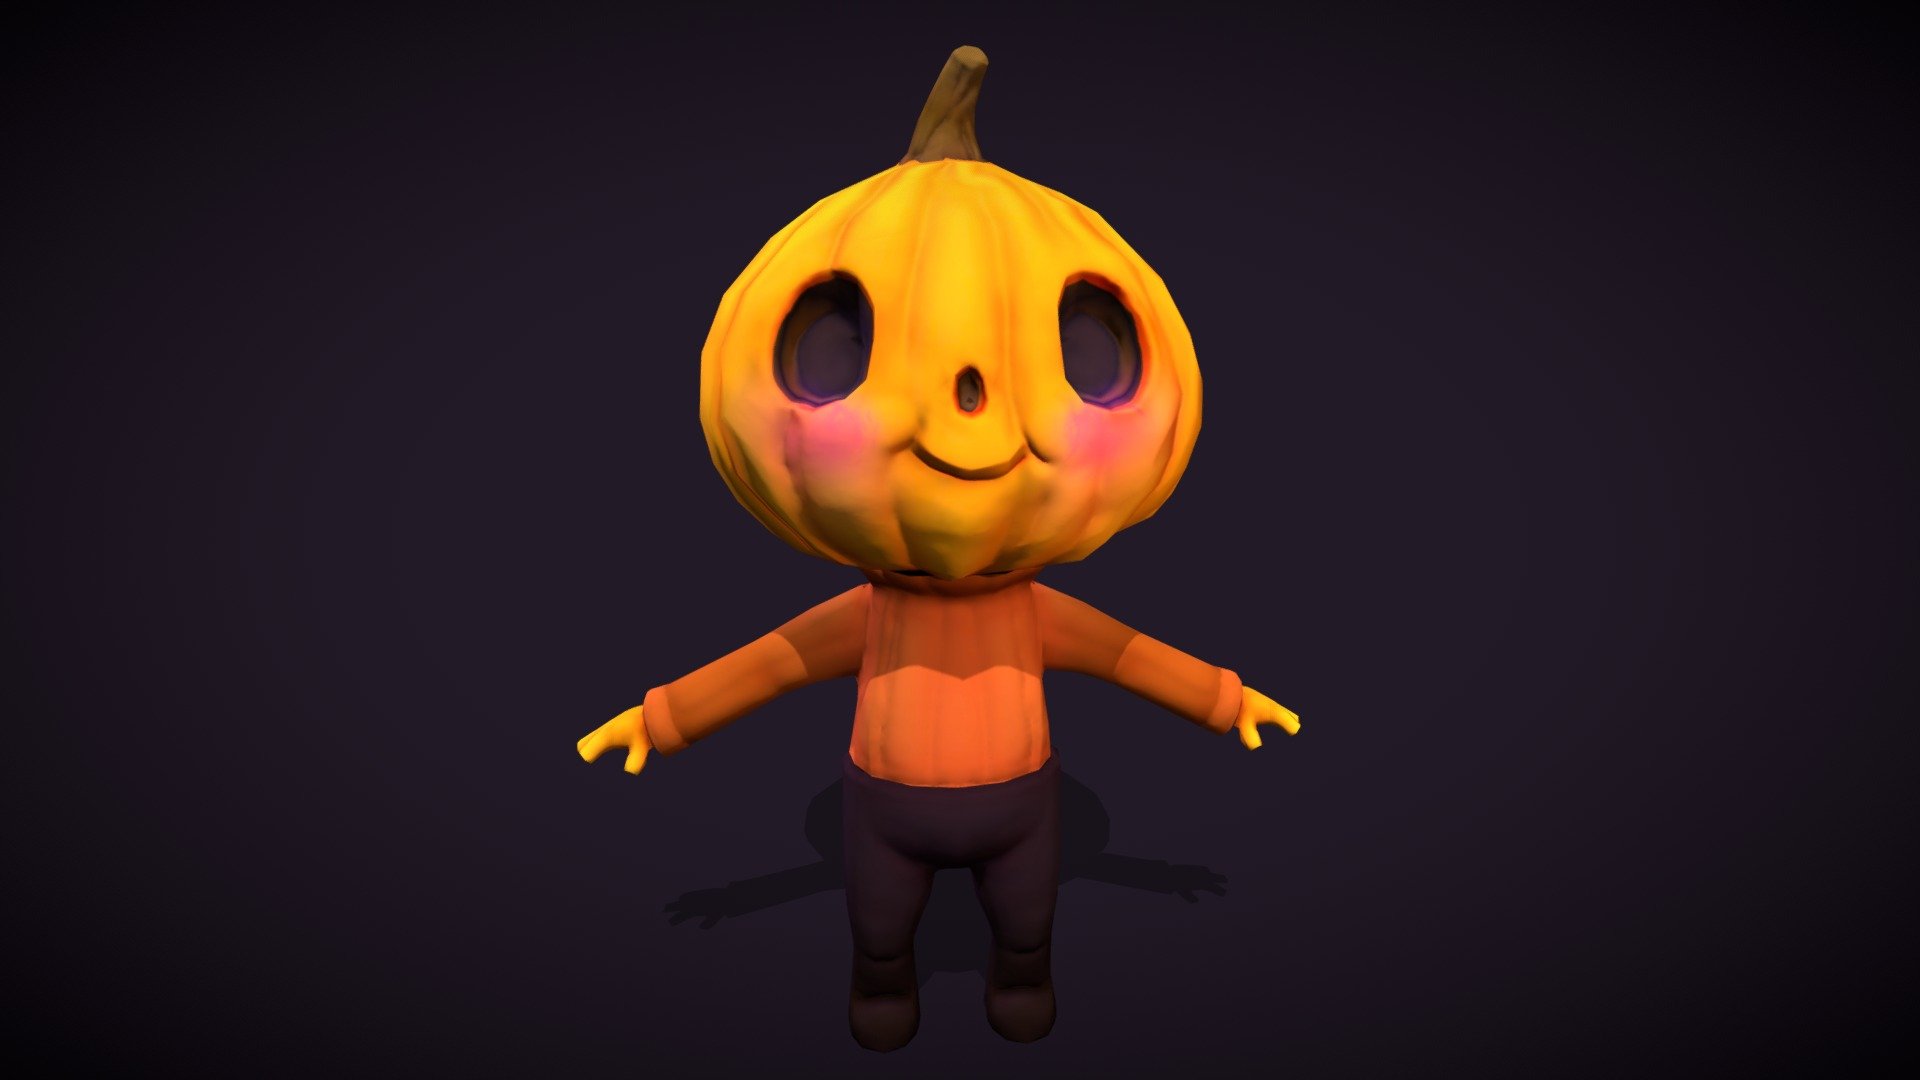 A cute pumpkin character I made for a Hallloween scene, based on a friend's design

Modeled in Blender 3D and textured on Substance Painter.

I've posted the final scene in my Instagram account, if you wish to see it: https://www.instagram.com/p/CVtTKhBPAx2/ - 🎃 Little Pumpkin Guy - 3D model by FranMelink 3d model